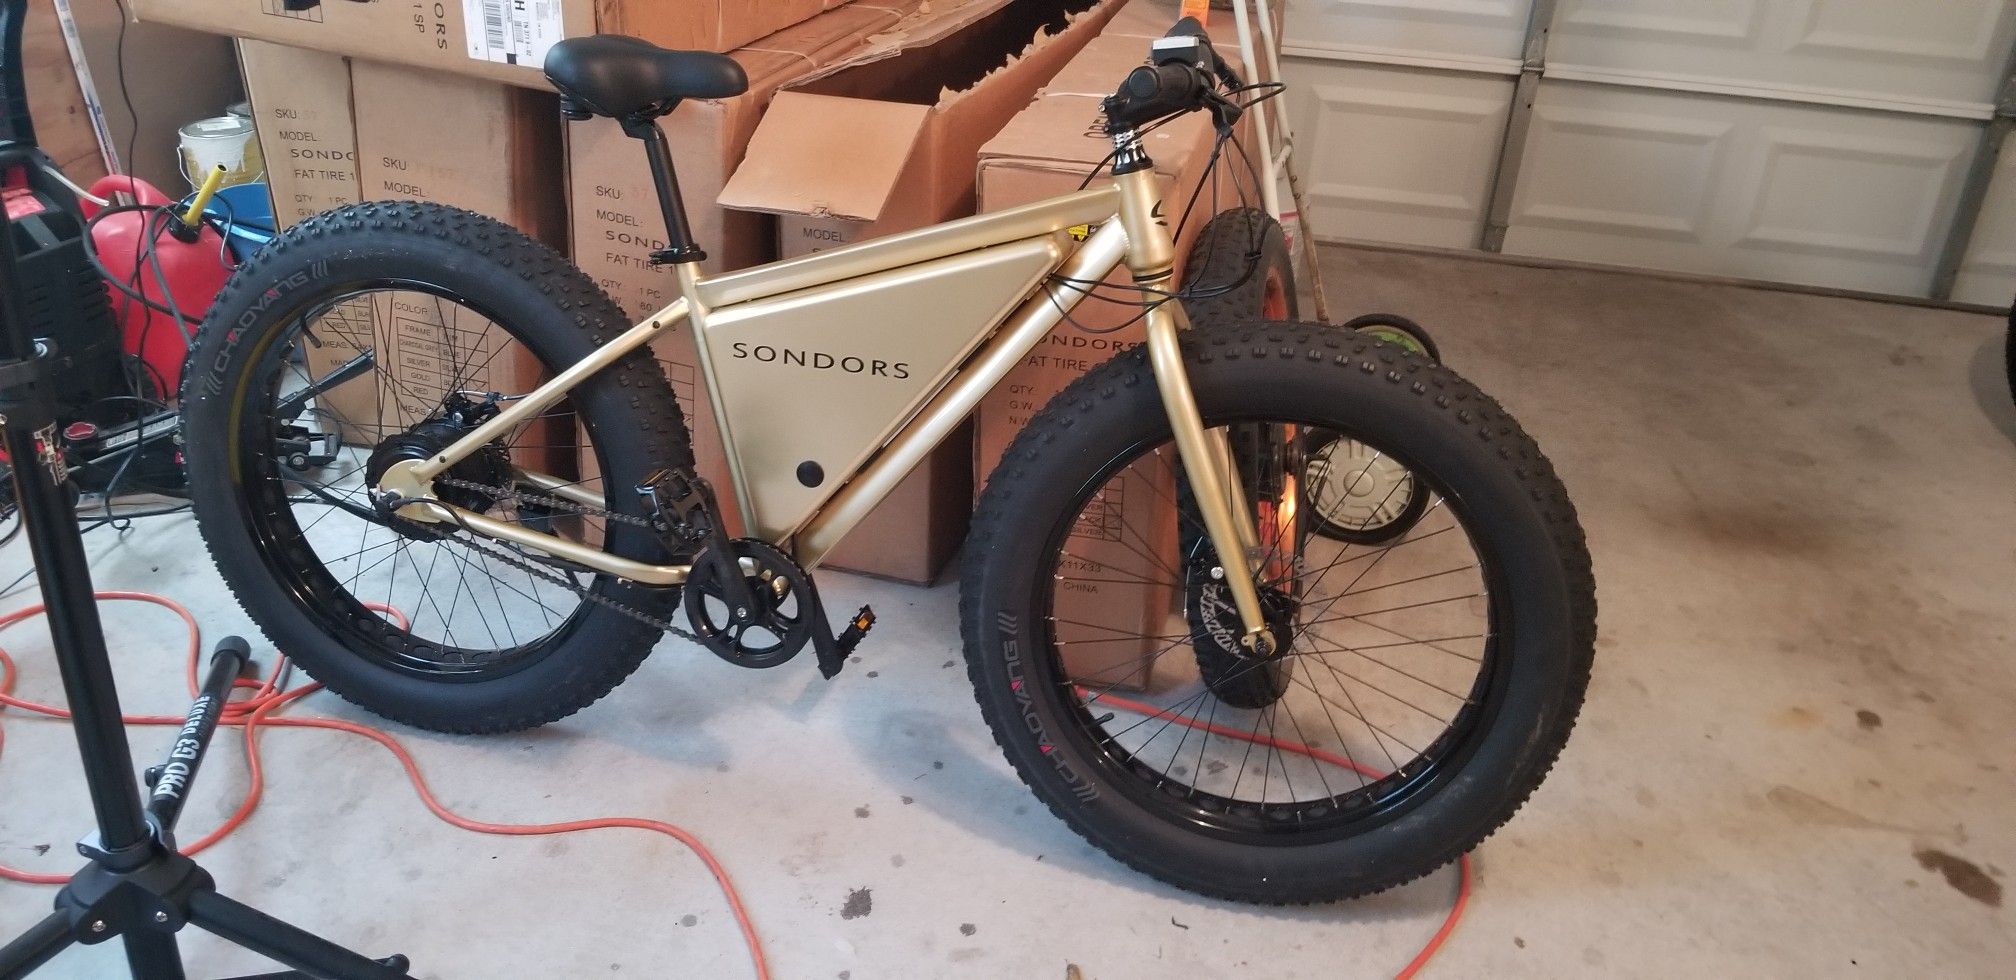 Brand new Sondors electric bicycle 0 miles. 2 available $1000 each fully assembled